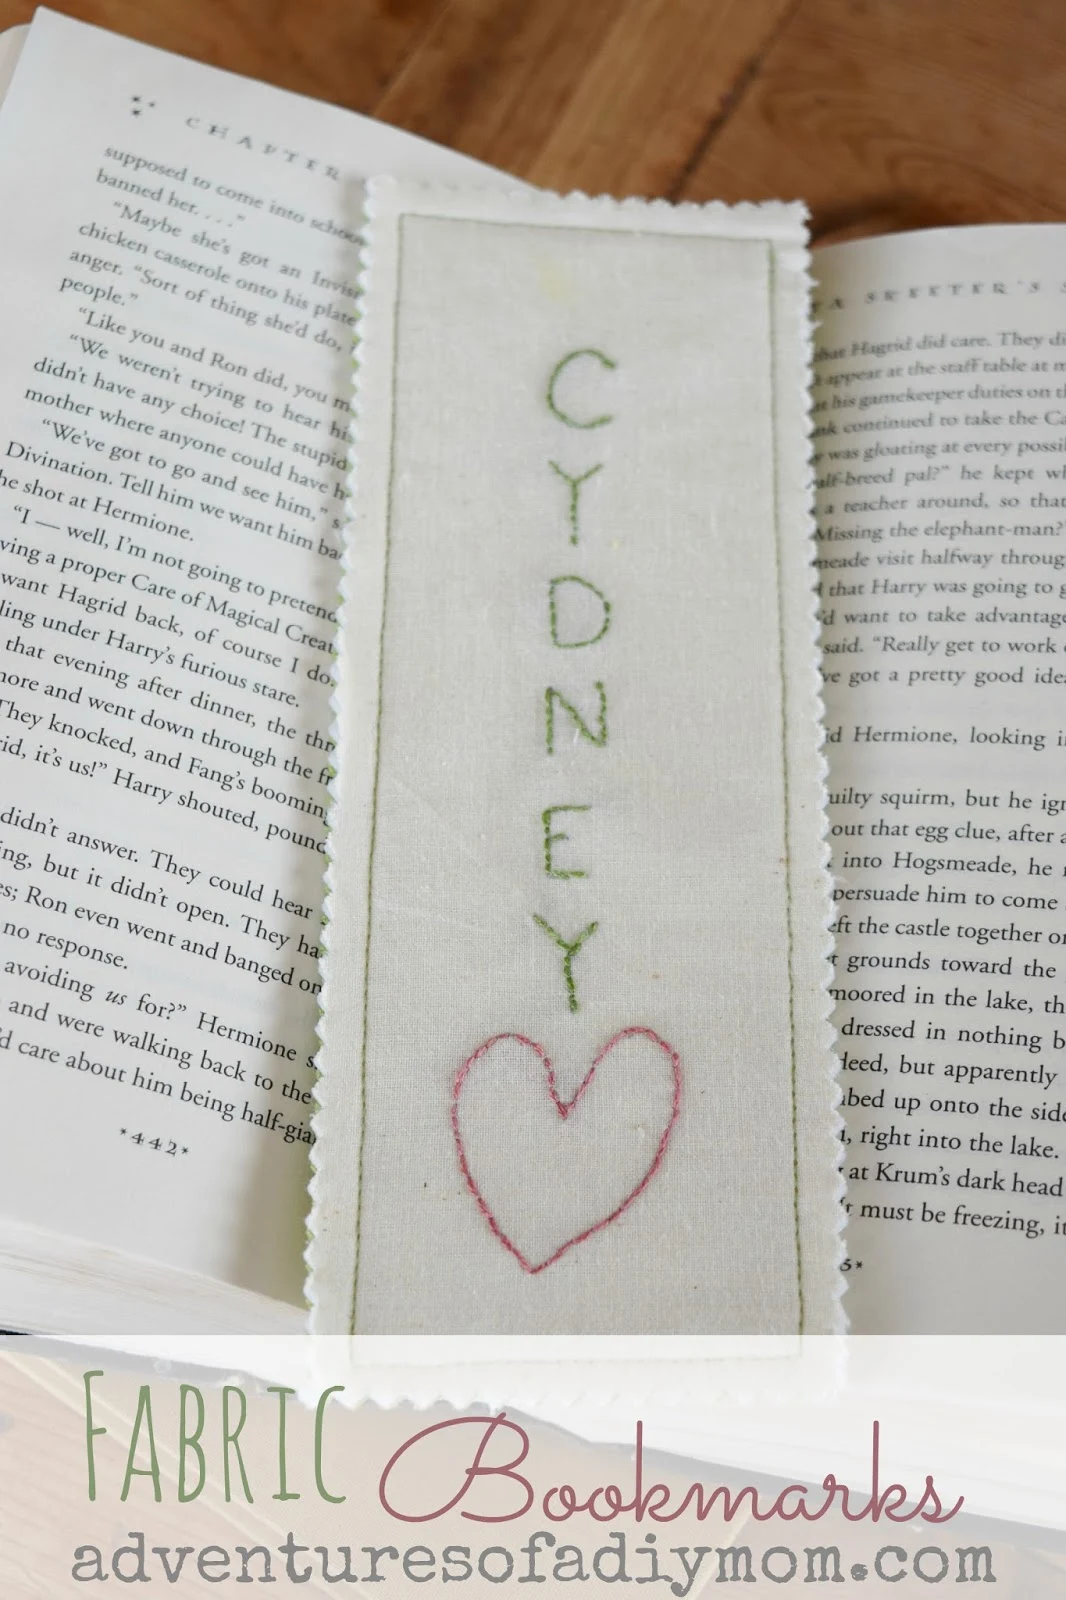 Fabric Embroidered Bookmarks